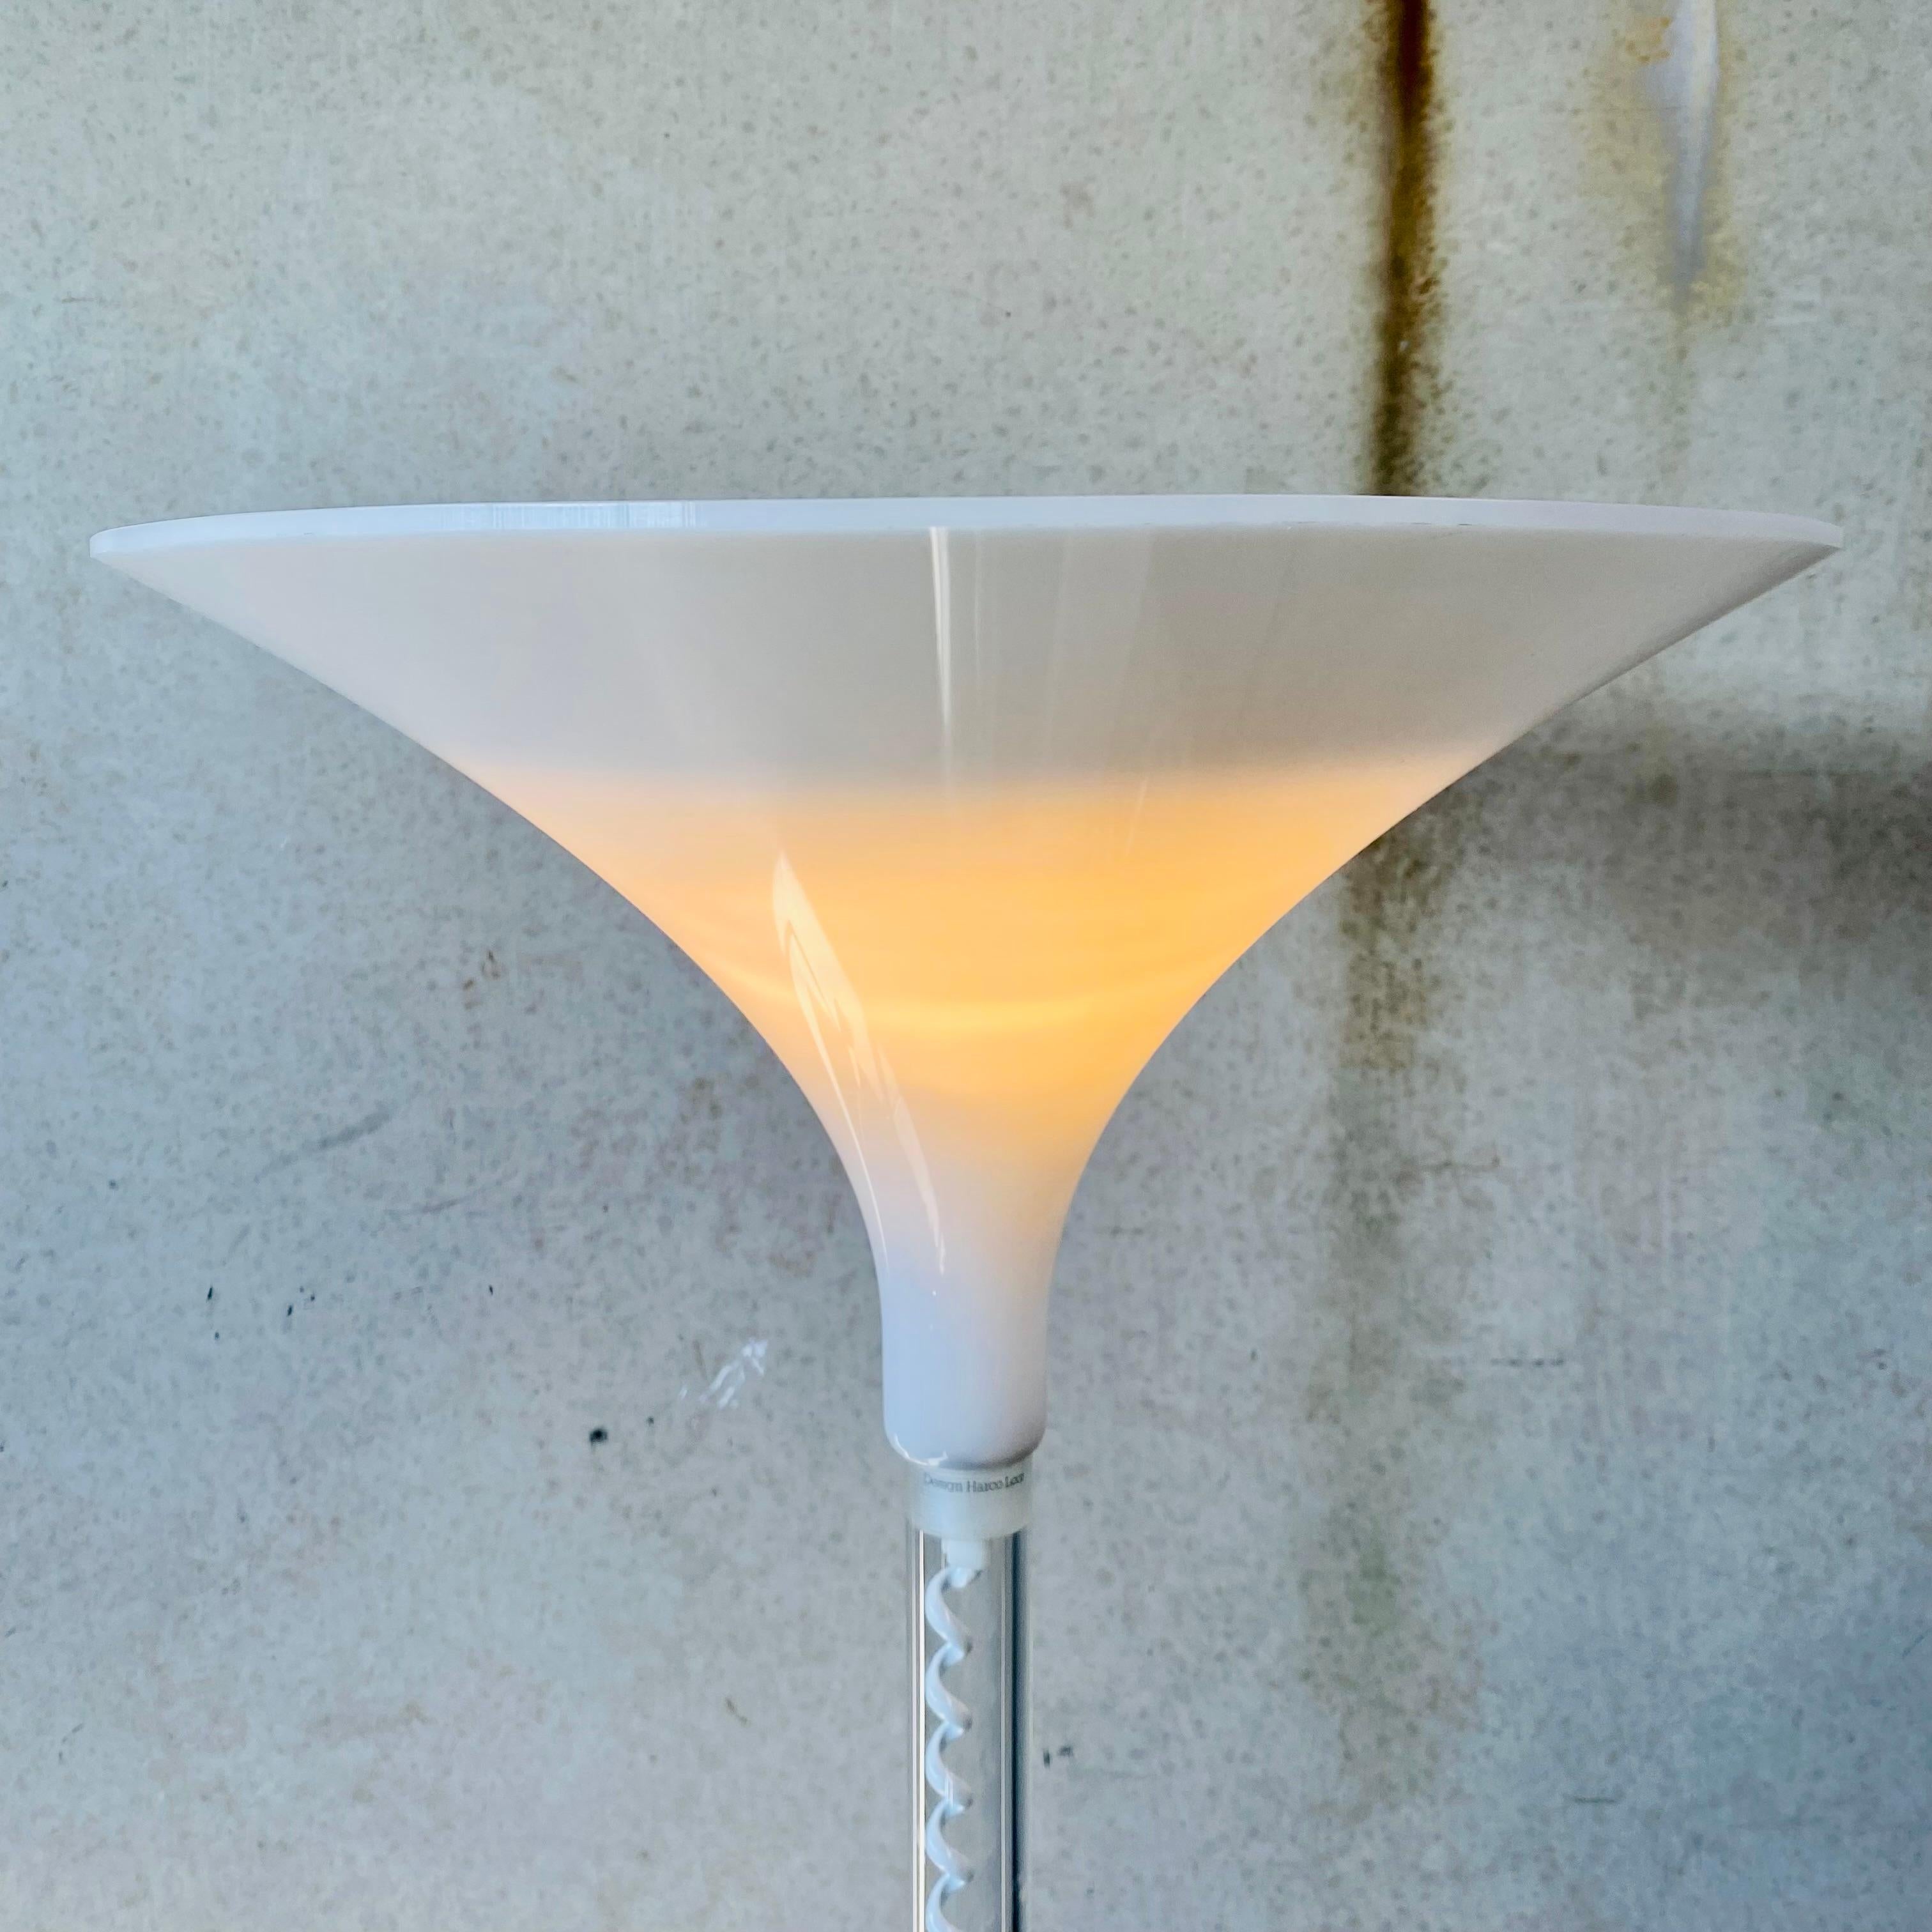 Mid-century lucite Floor Lamp by Harco Loor, the Netherlands, 1980's For Sale 5